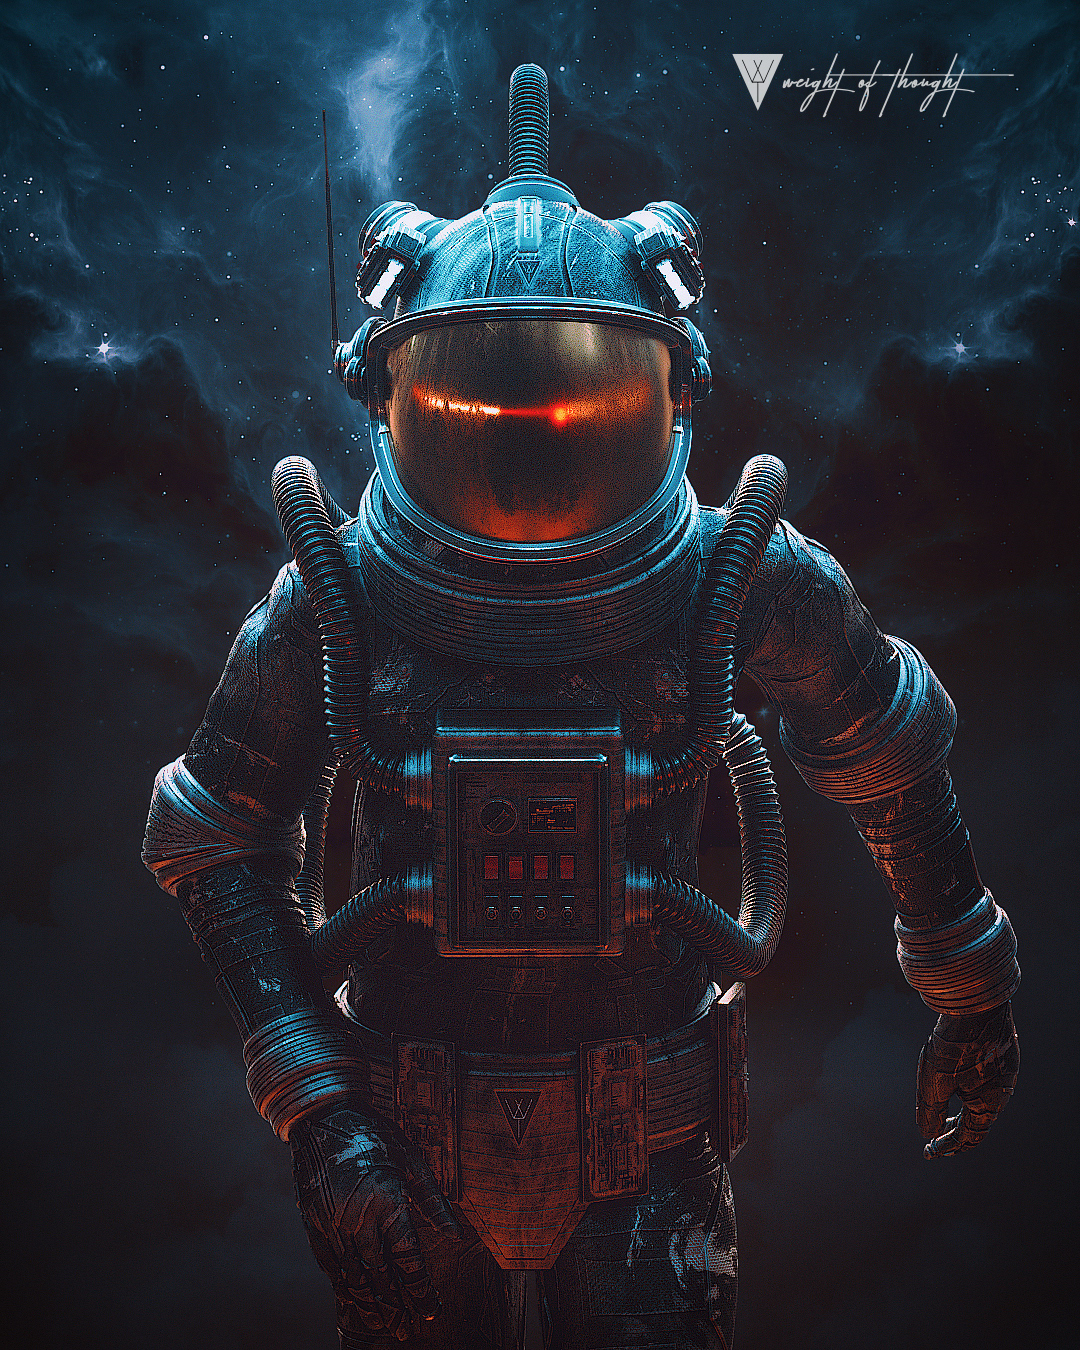 astronaut Space  Scifi weight of thought music video design Character design  alien science fiction cosmonaut